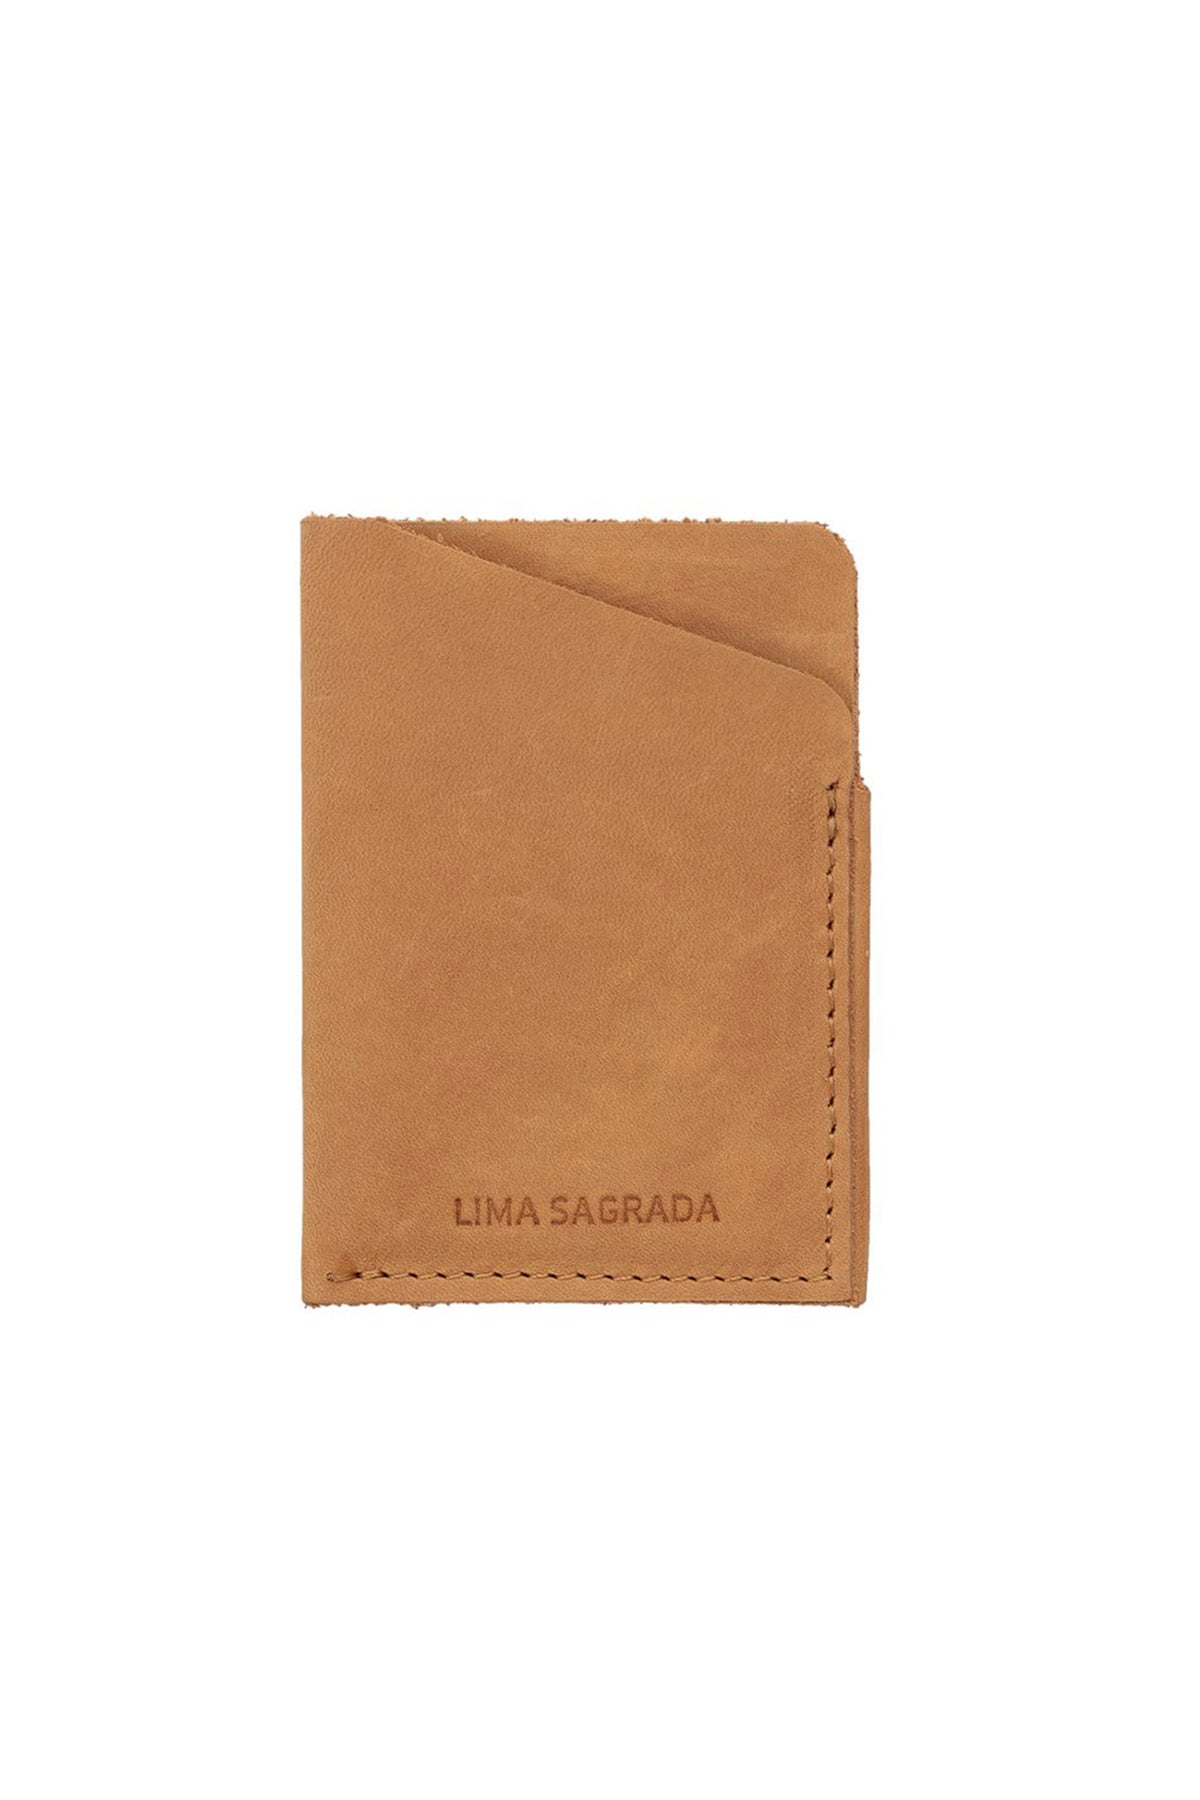   A minimalistic SOFT LEATHER CARD HOLDER BY LIMA SAGRADA, crafted by local artisans. 